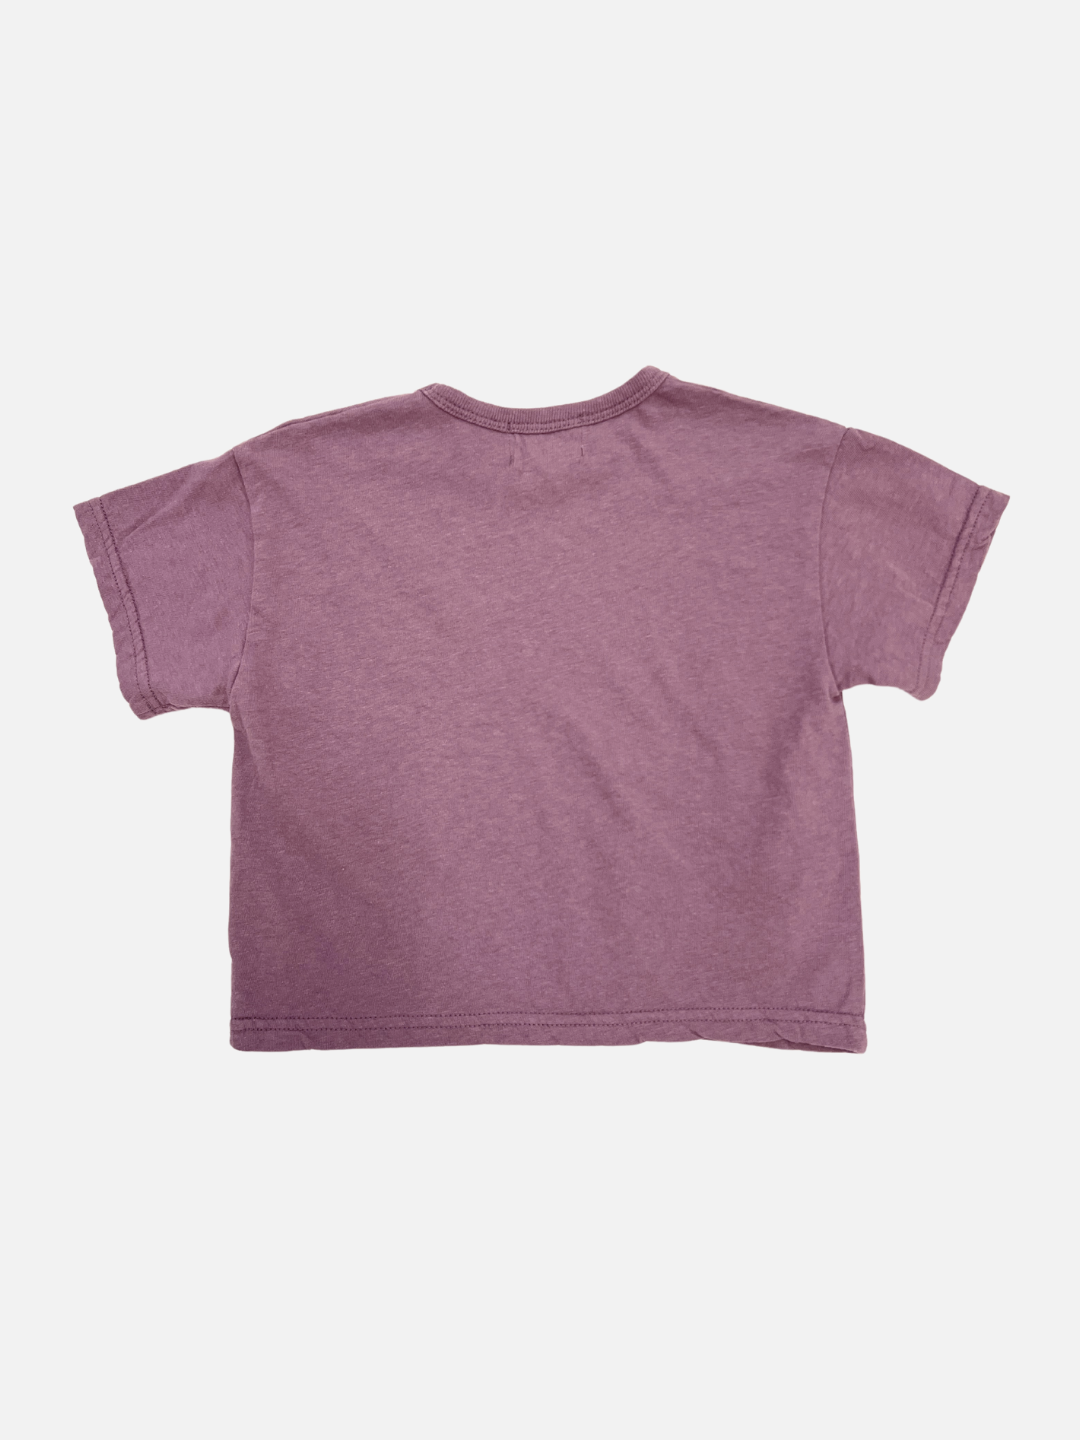 Mauve | Back view of the kid's Studio tee in mauve